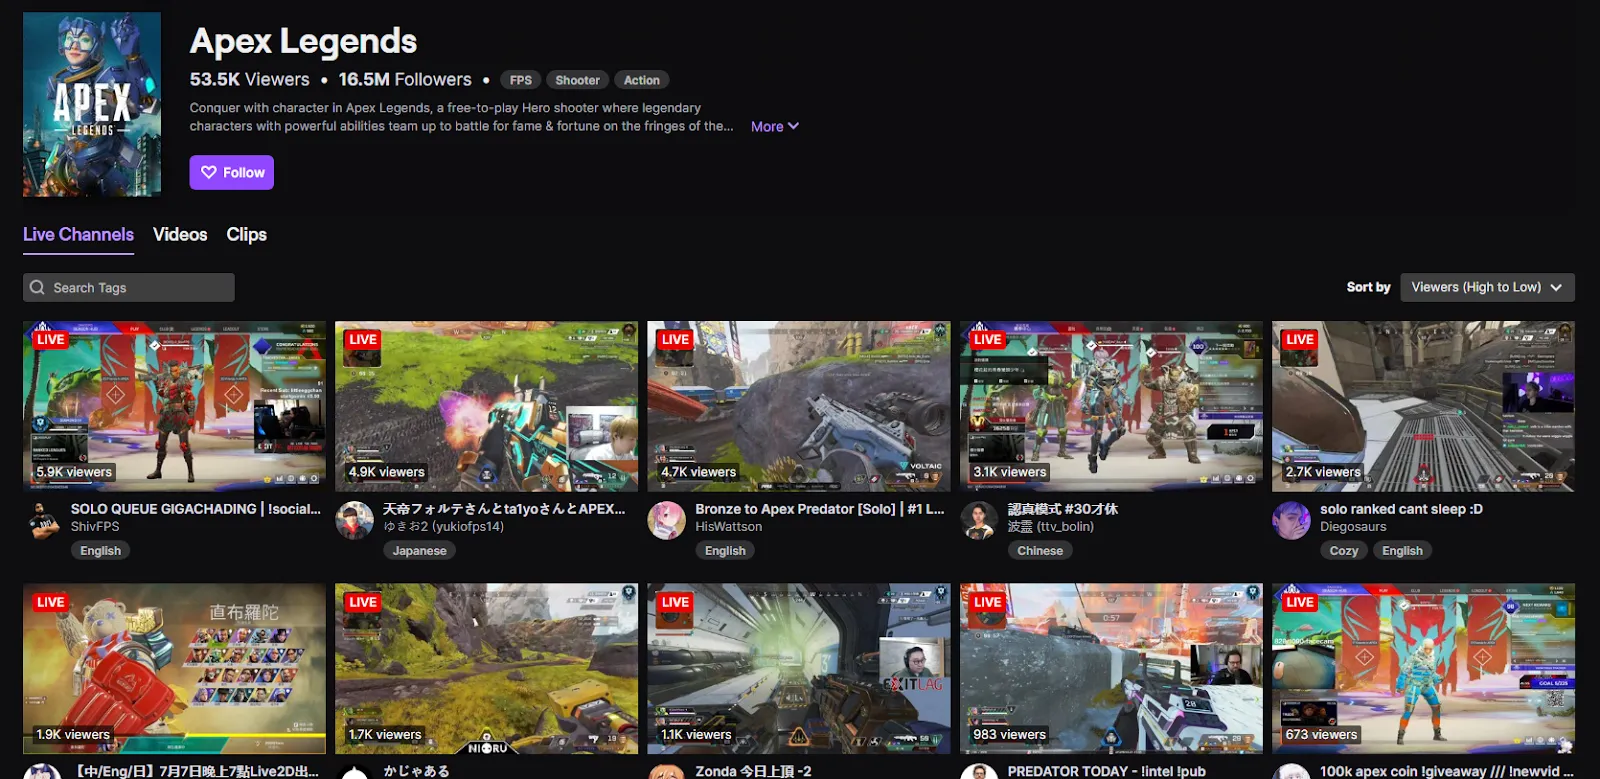 Apex Legends has over 16.5 million followers on Twitch, with hundreds of thousands active viewers, so good luck with that.